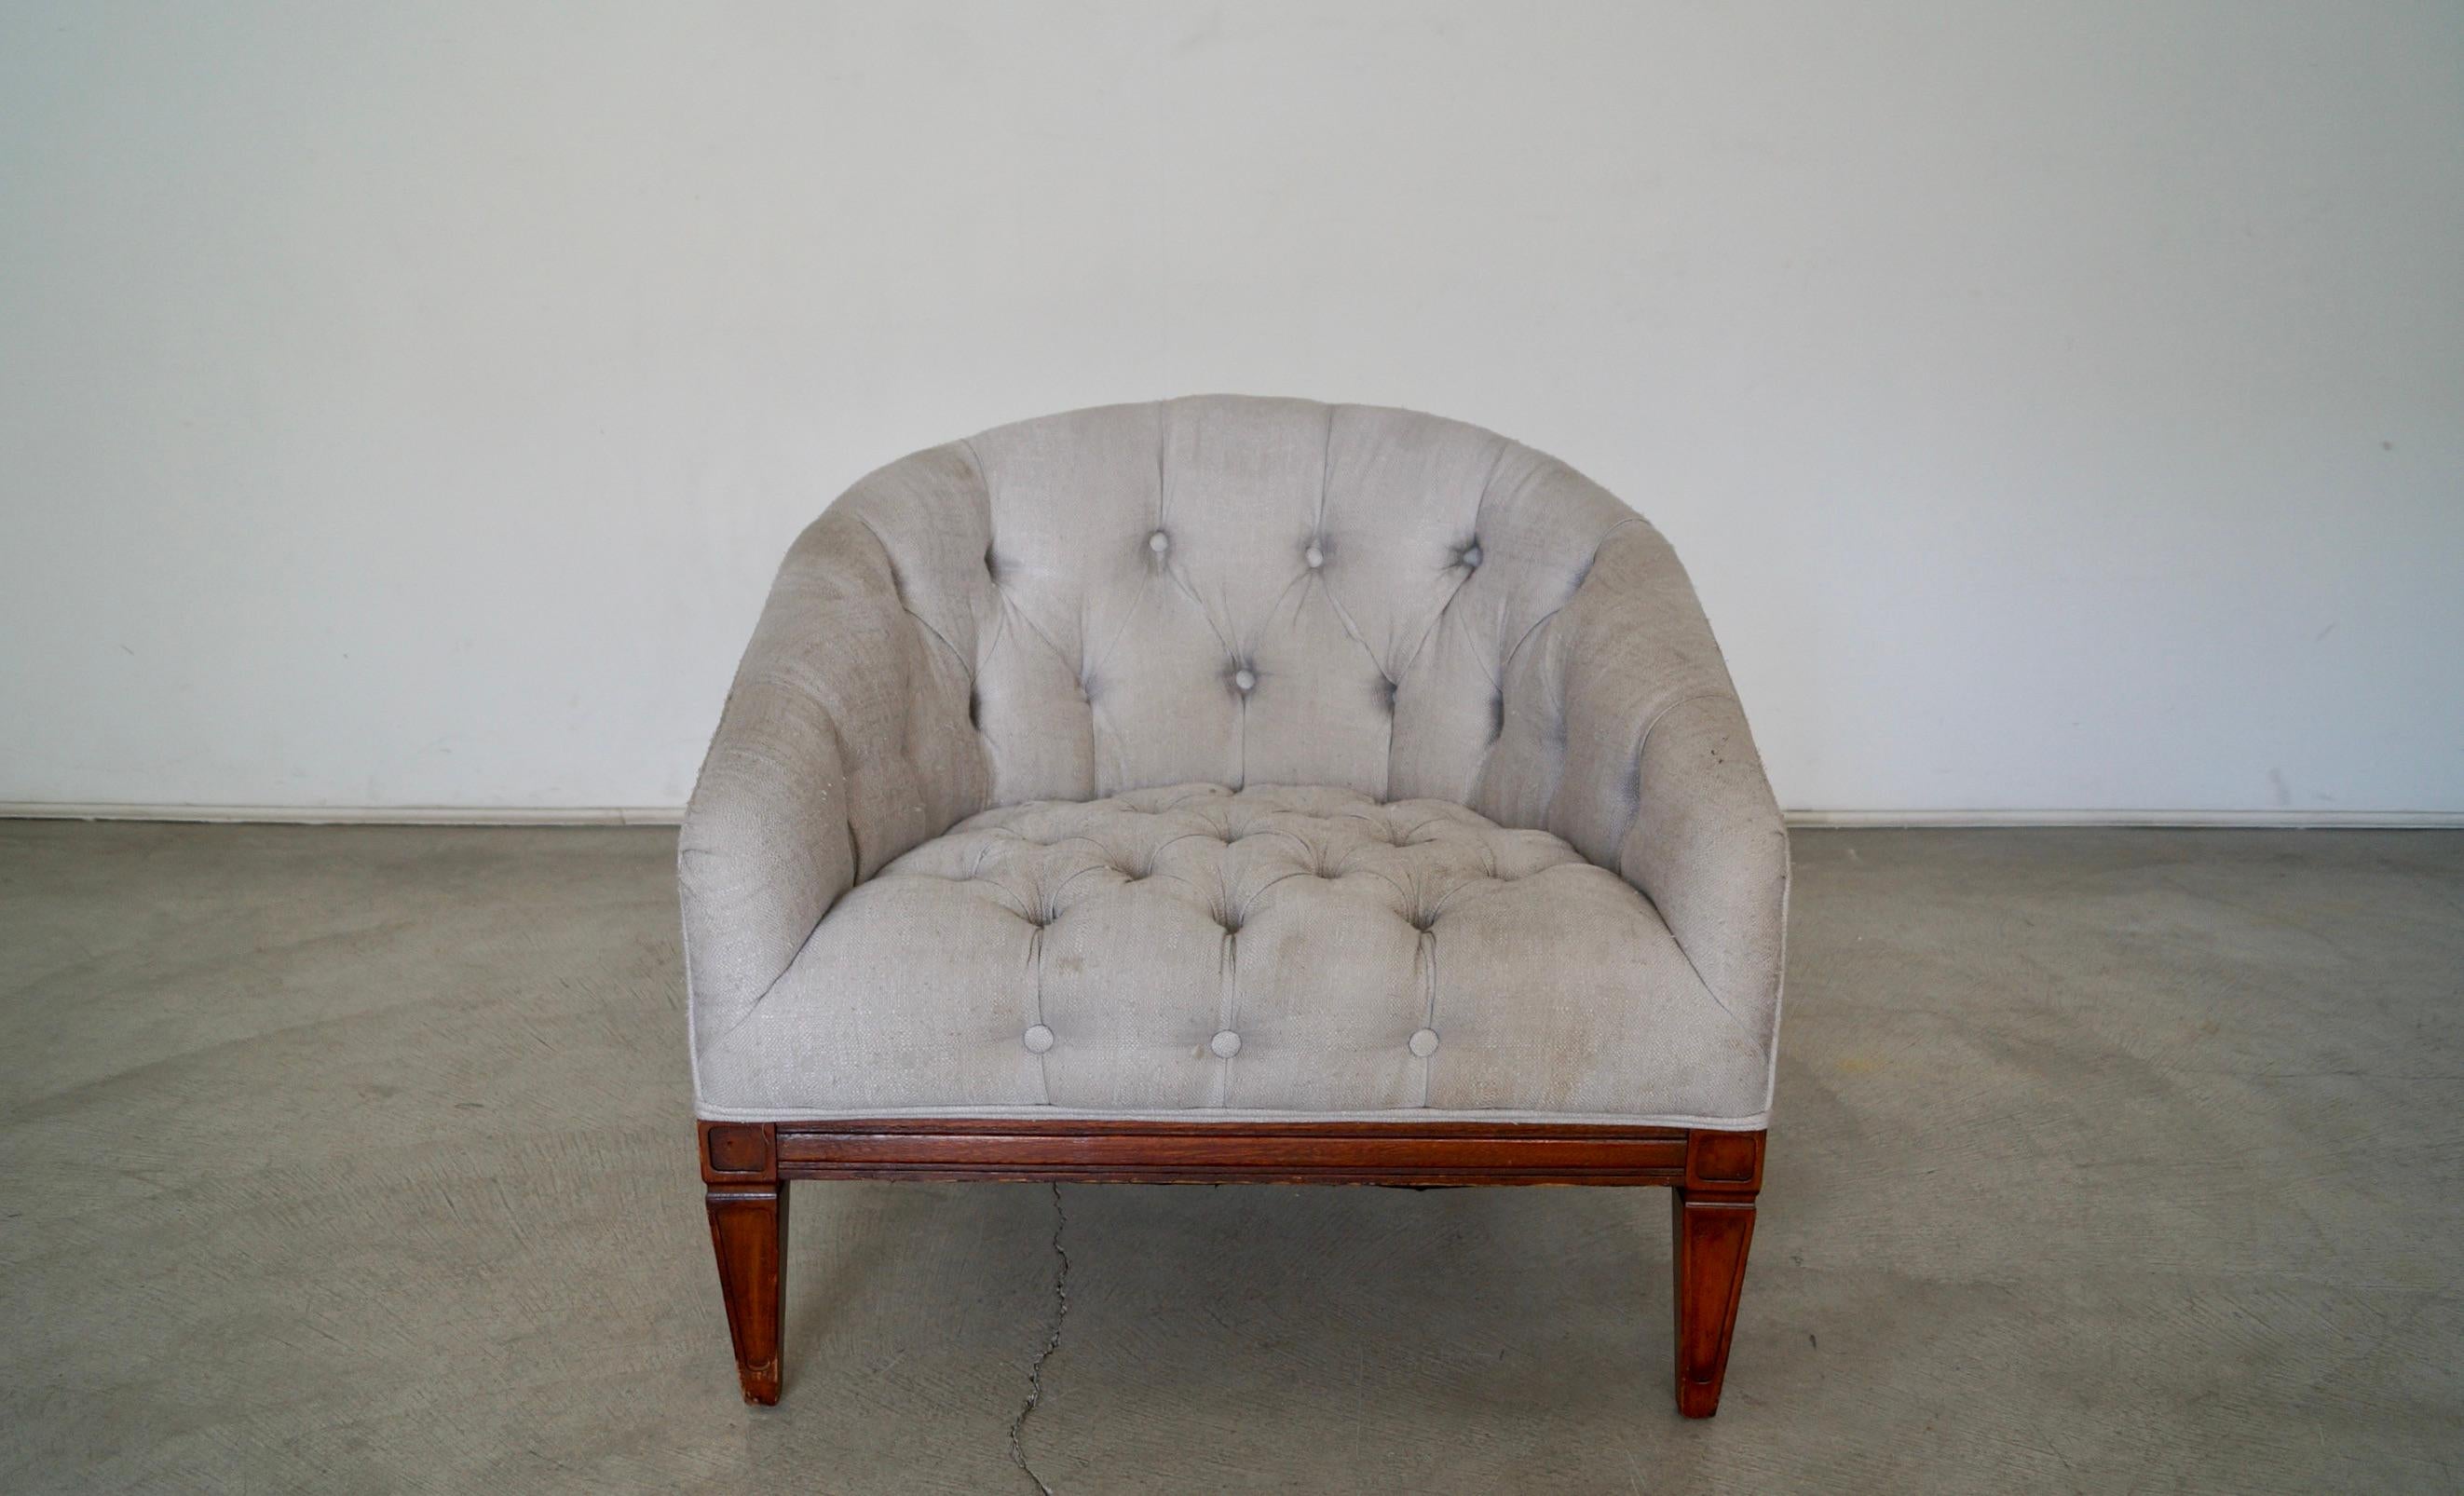 Vintage barrel-back Mid-Century Modern club chair for sale. Very solidly built, and very comfortable. It's a tufted chair, and needs to be reupholstered. It has a solid wood base with tapered legs, and has springs on the seatrest. It's a great